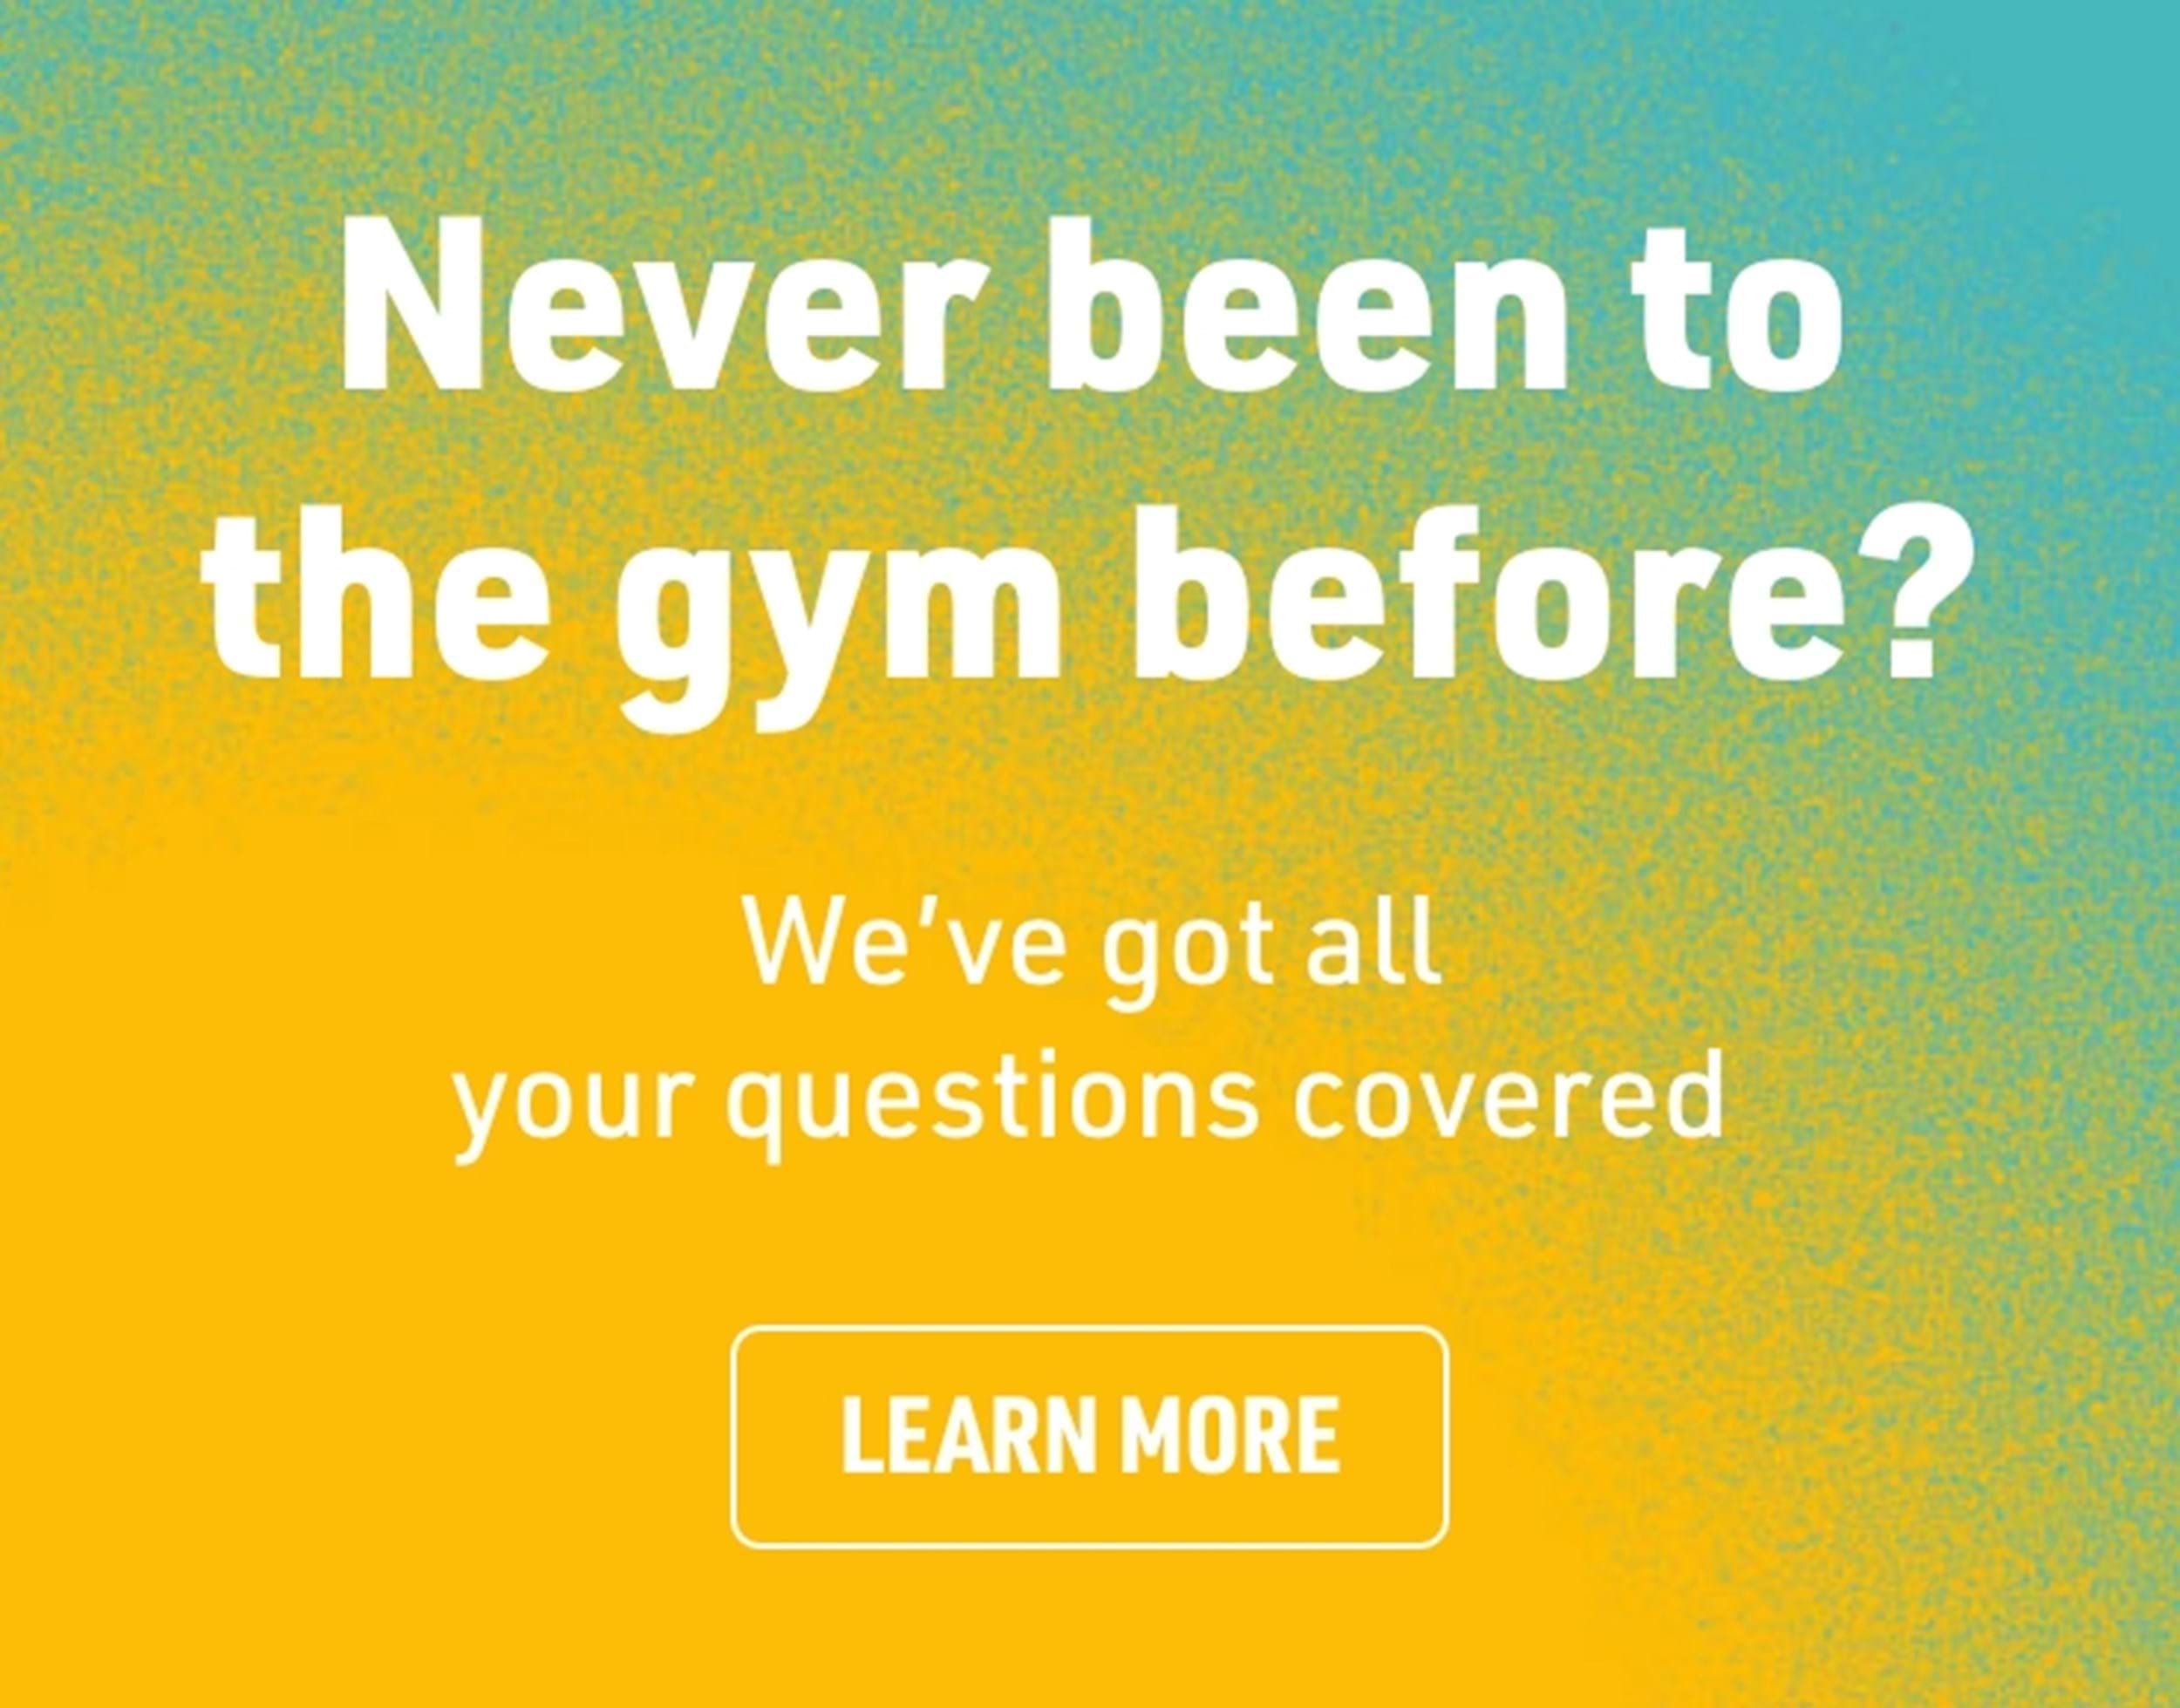 Never been to the gym before? We've got all of your questions covered